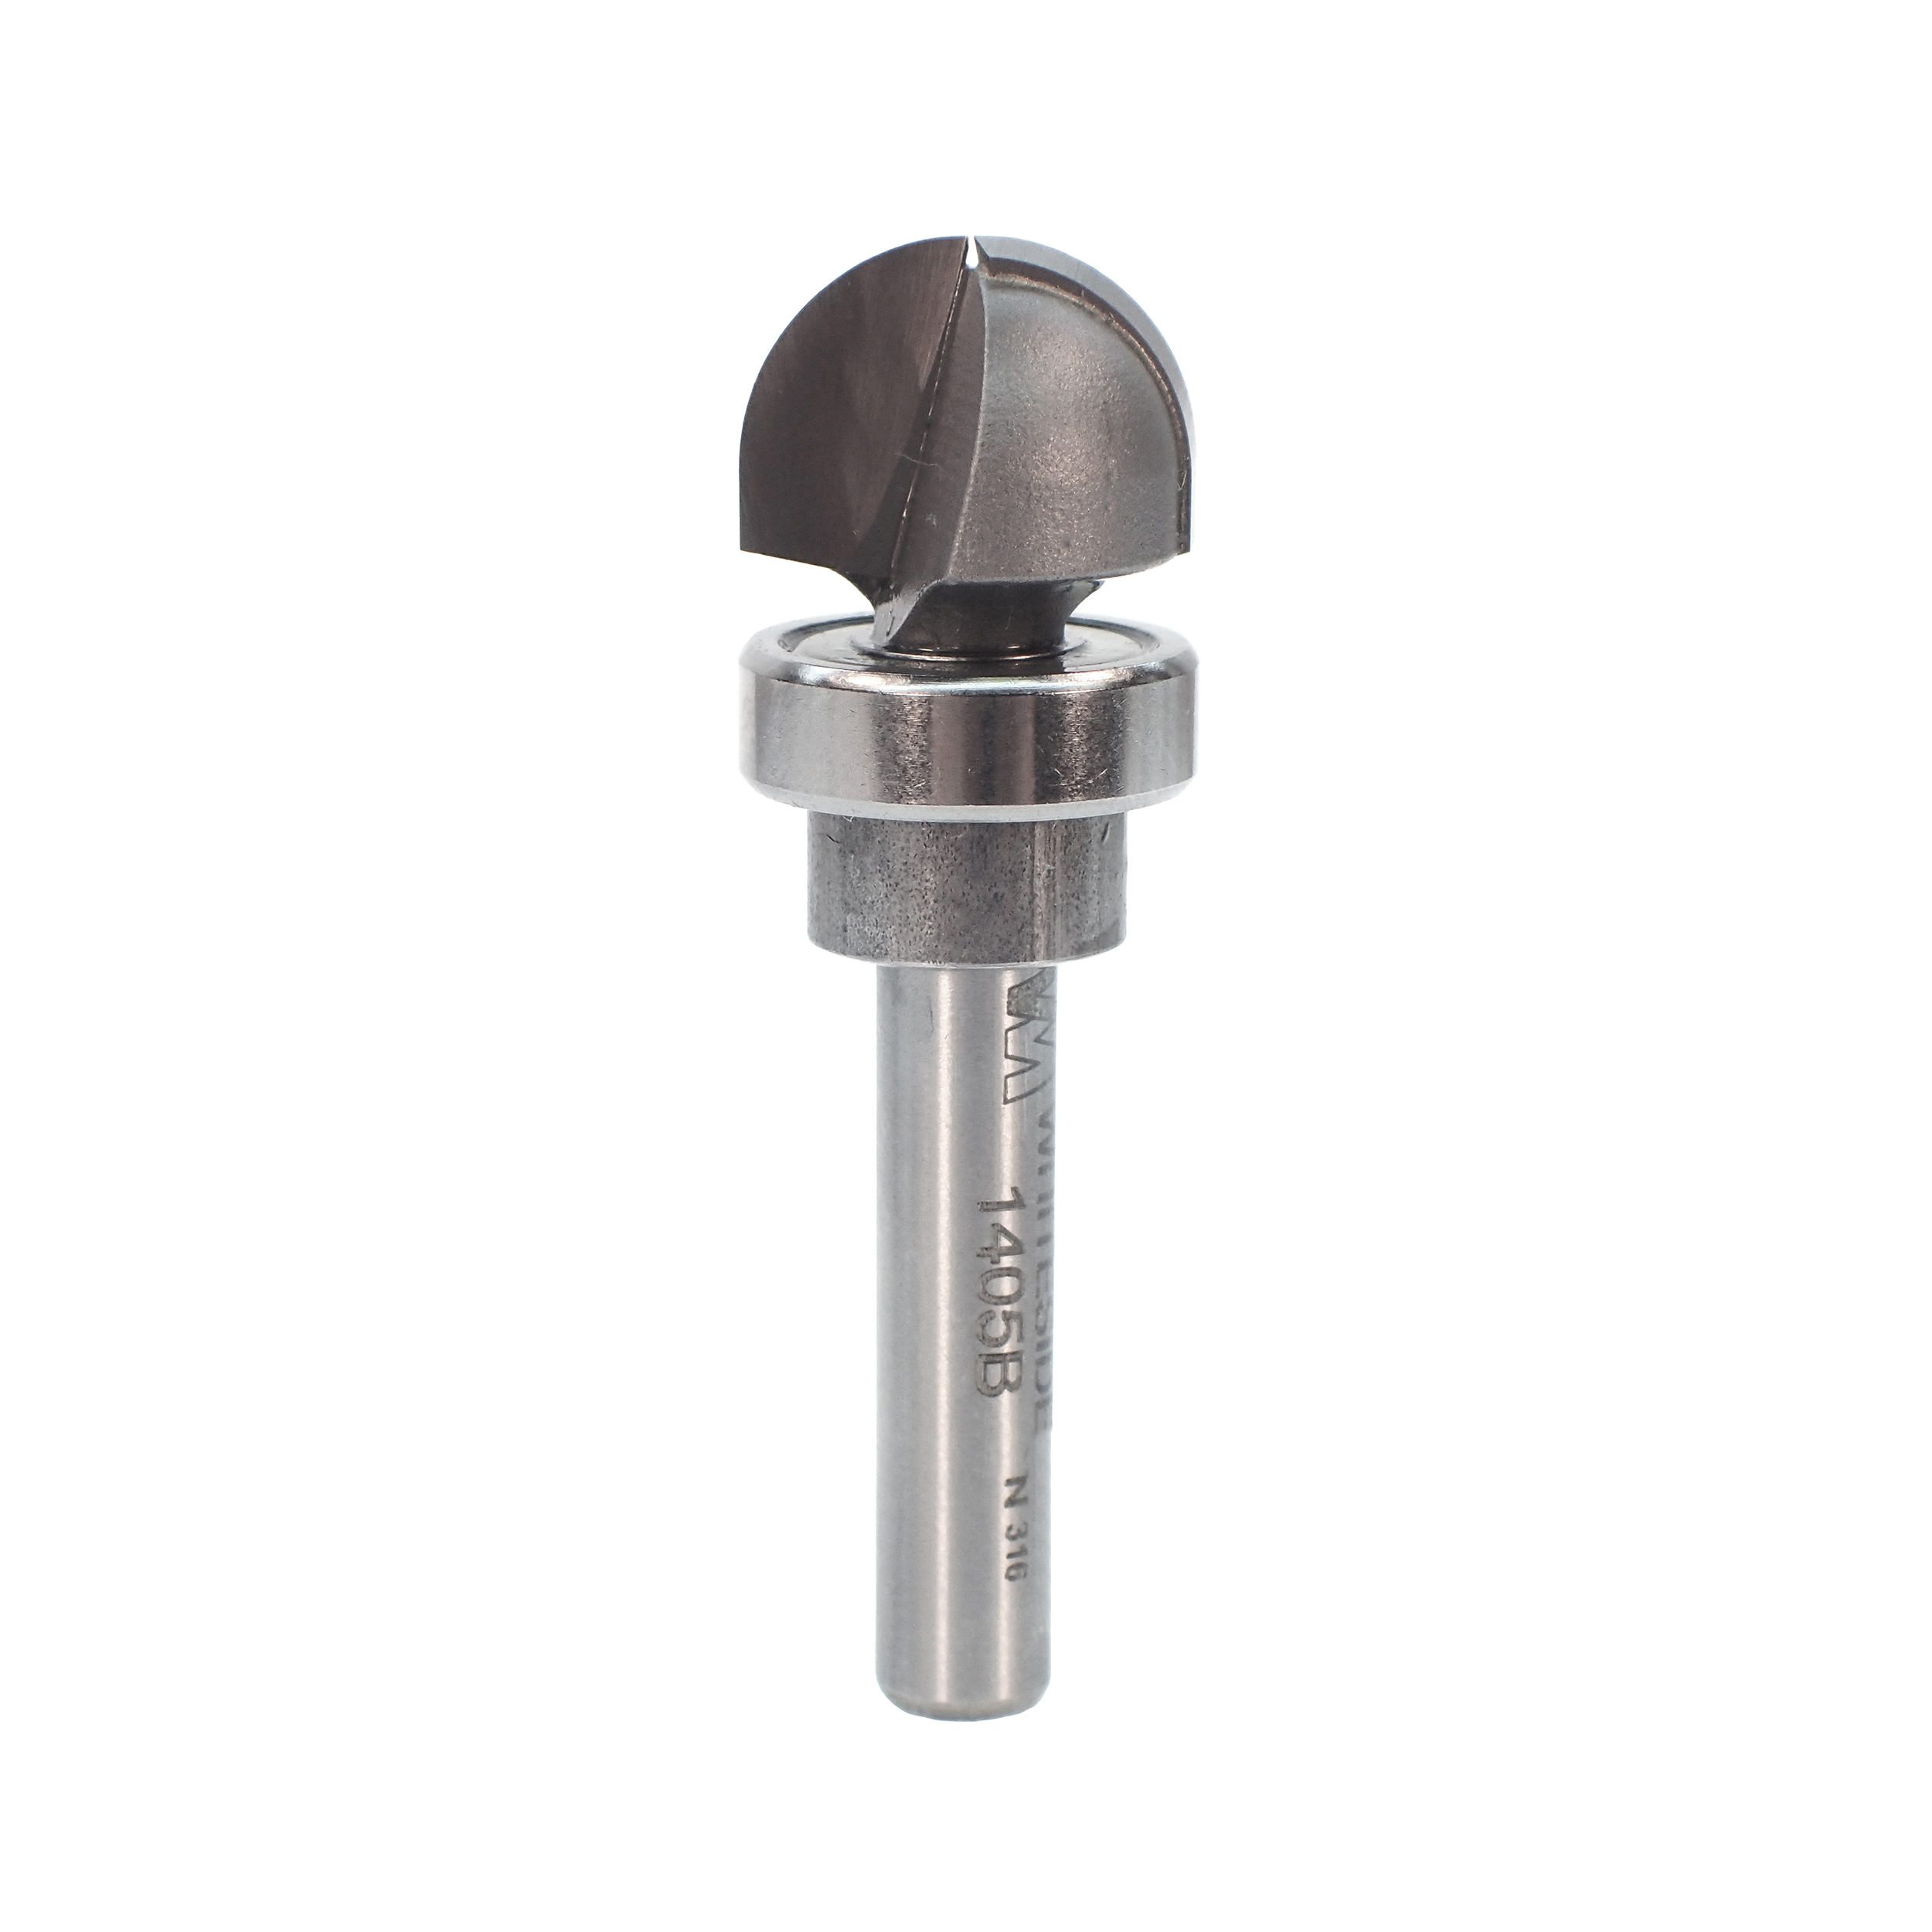 1405b B6 Bearing Round Nose Router Bit With Bearing Guide 5/16" R X 5/8" D X 3/8" Cl X 1/4